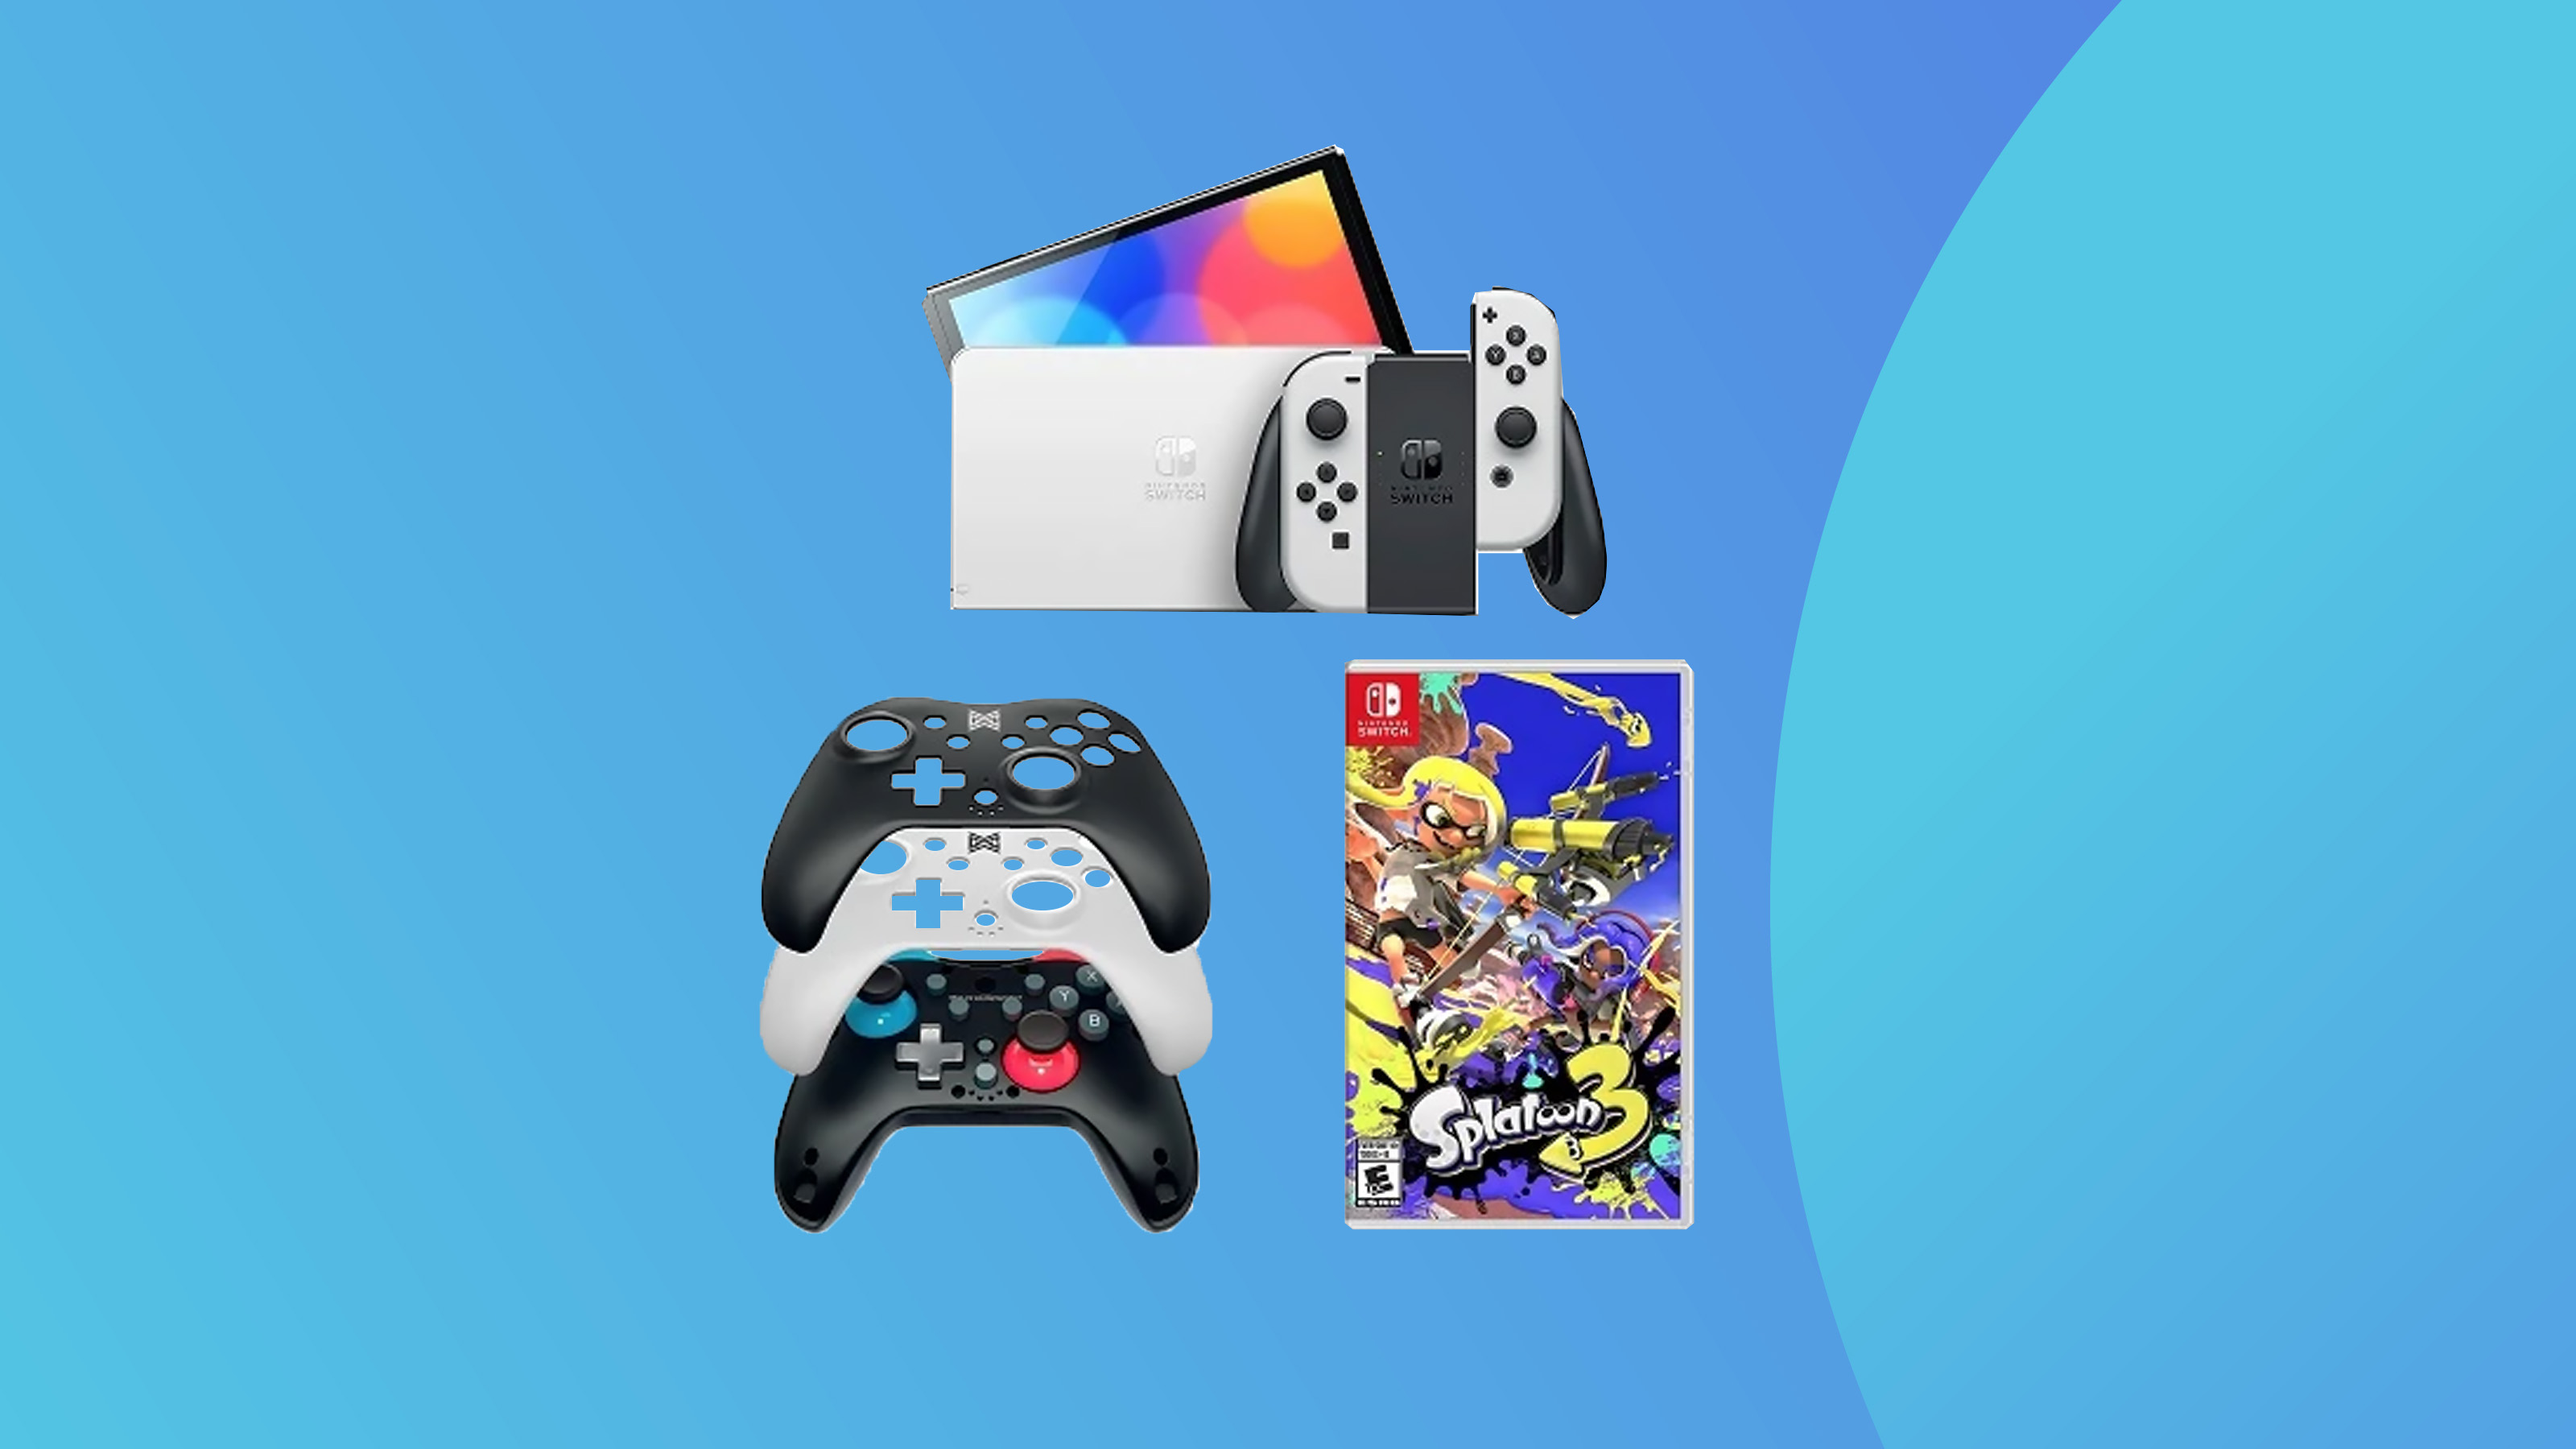 A product photo of the Switch Oled and accessories on a colorful background